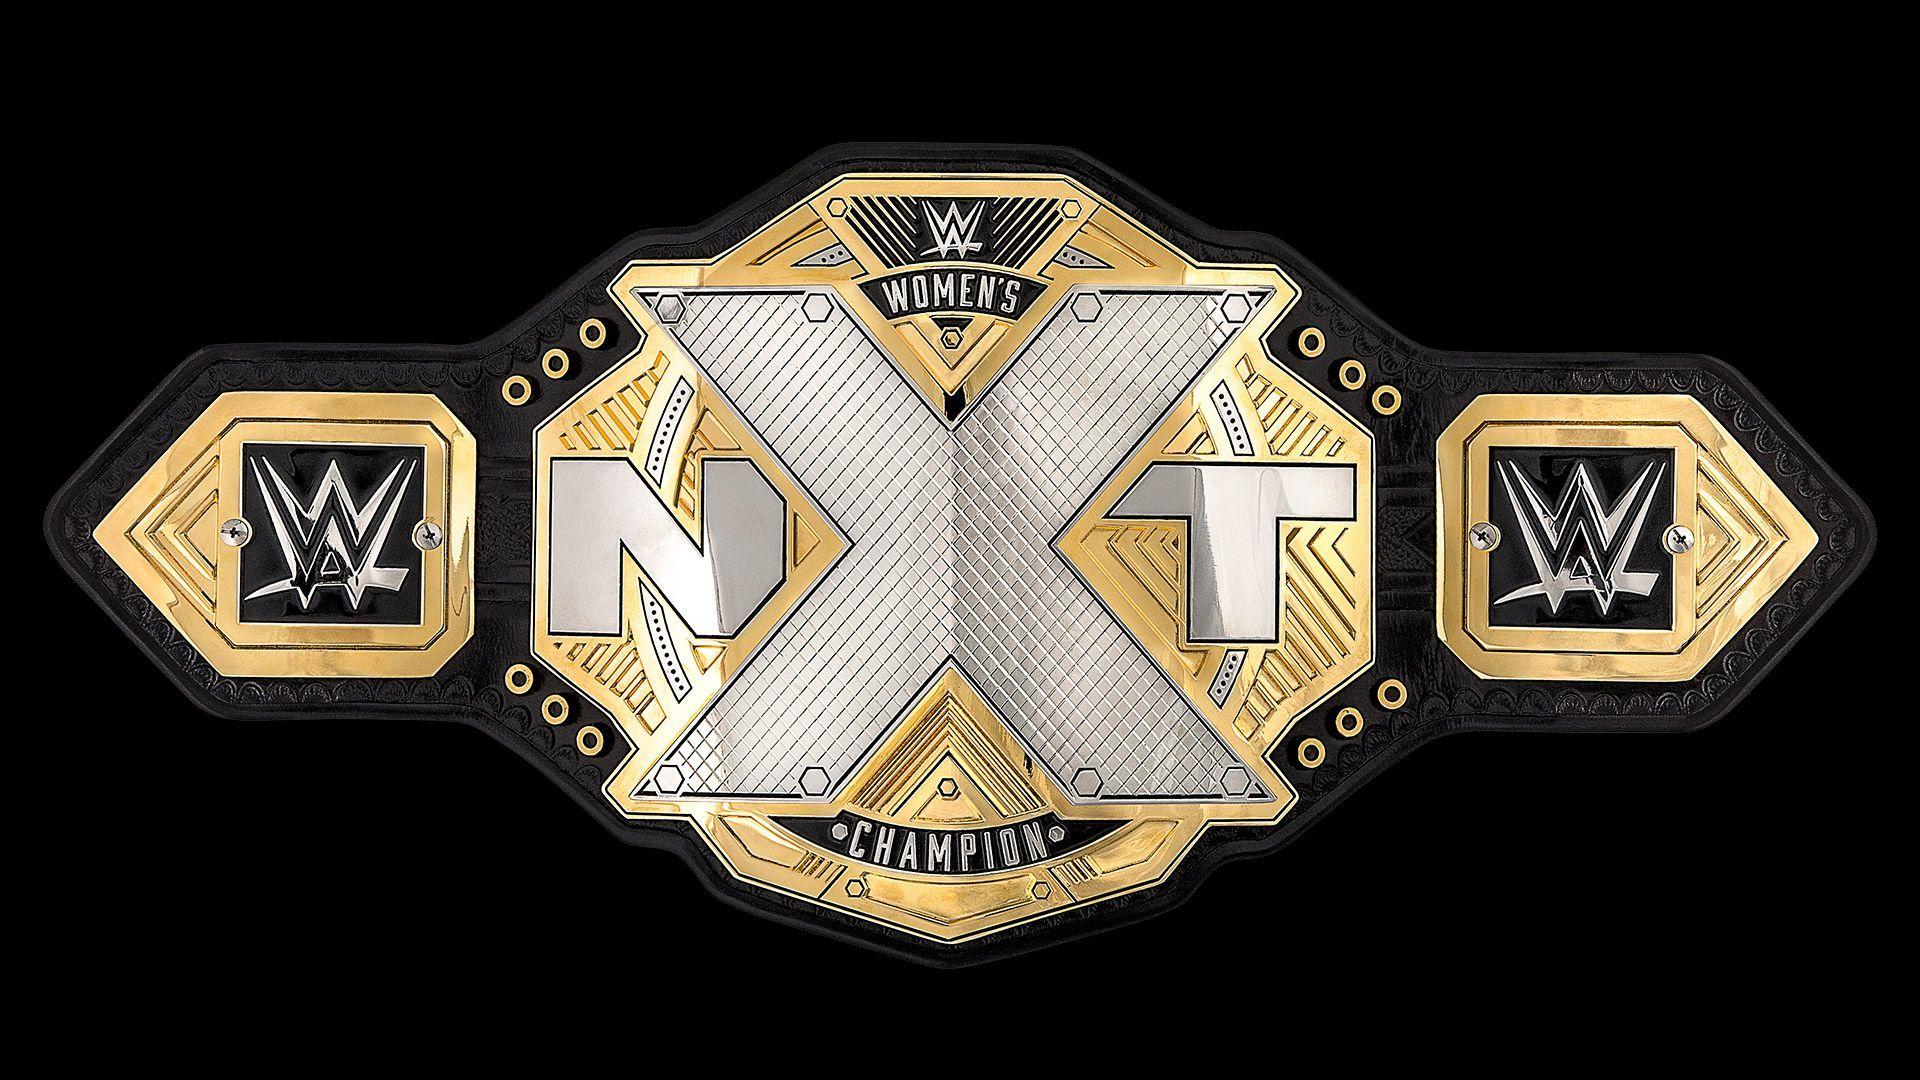 Photos: Exclusive image of the new NXT Women's Championship